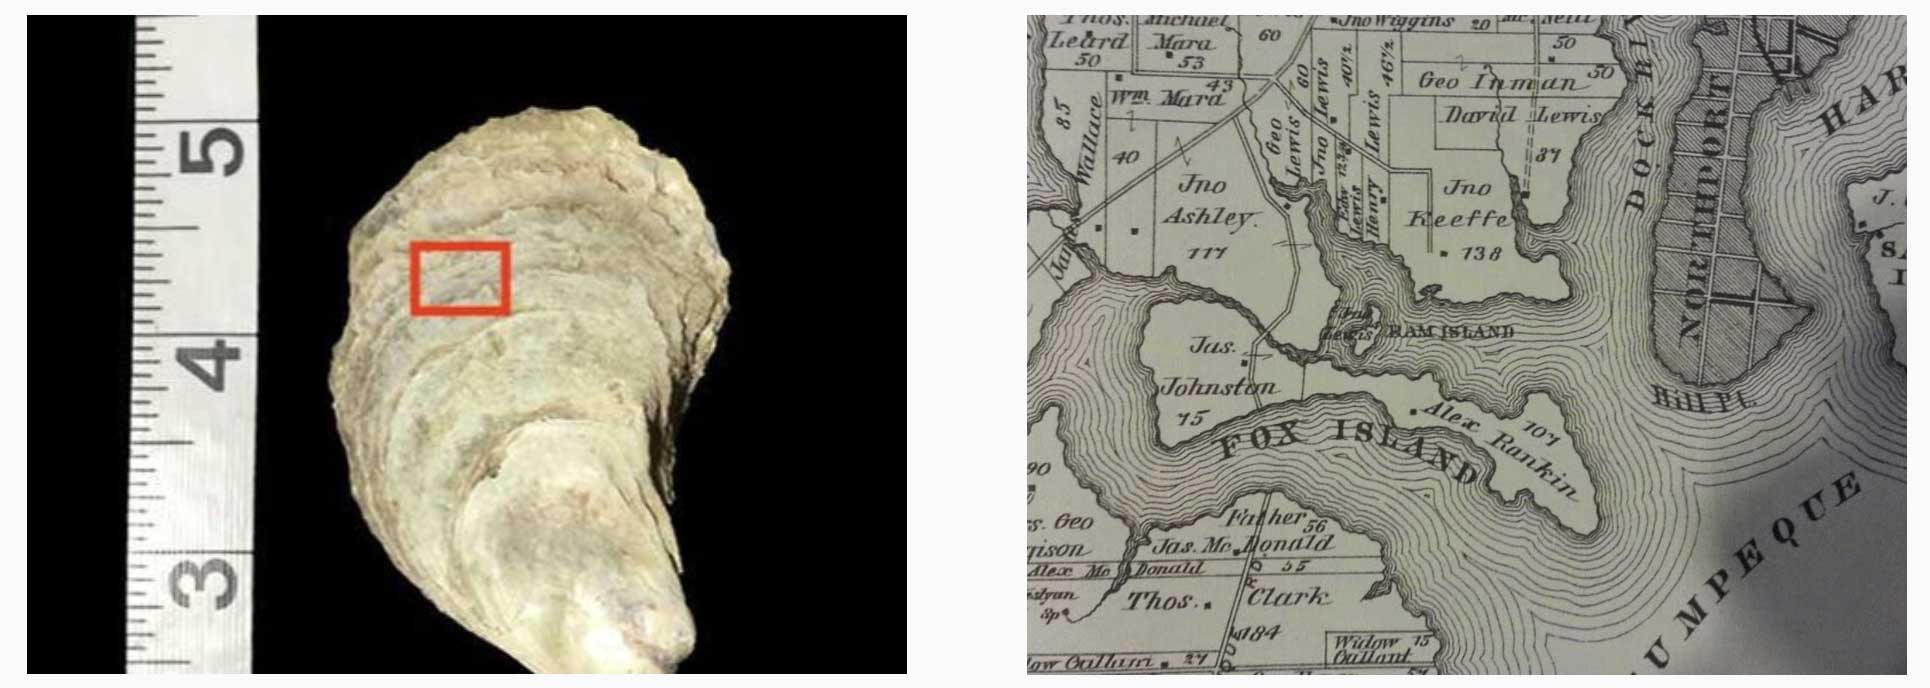 Oyster shell that inspired Elation and map where harvested